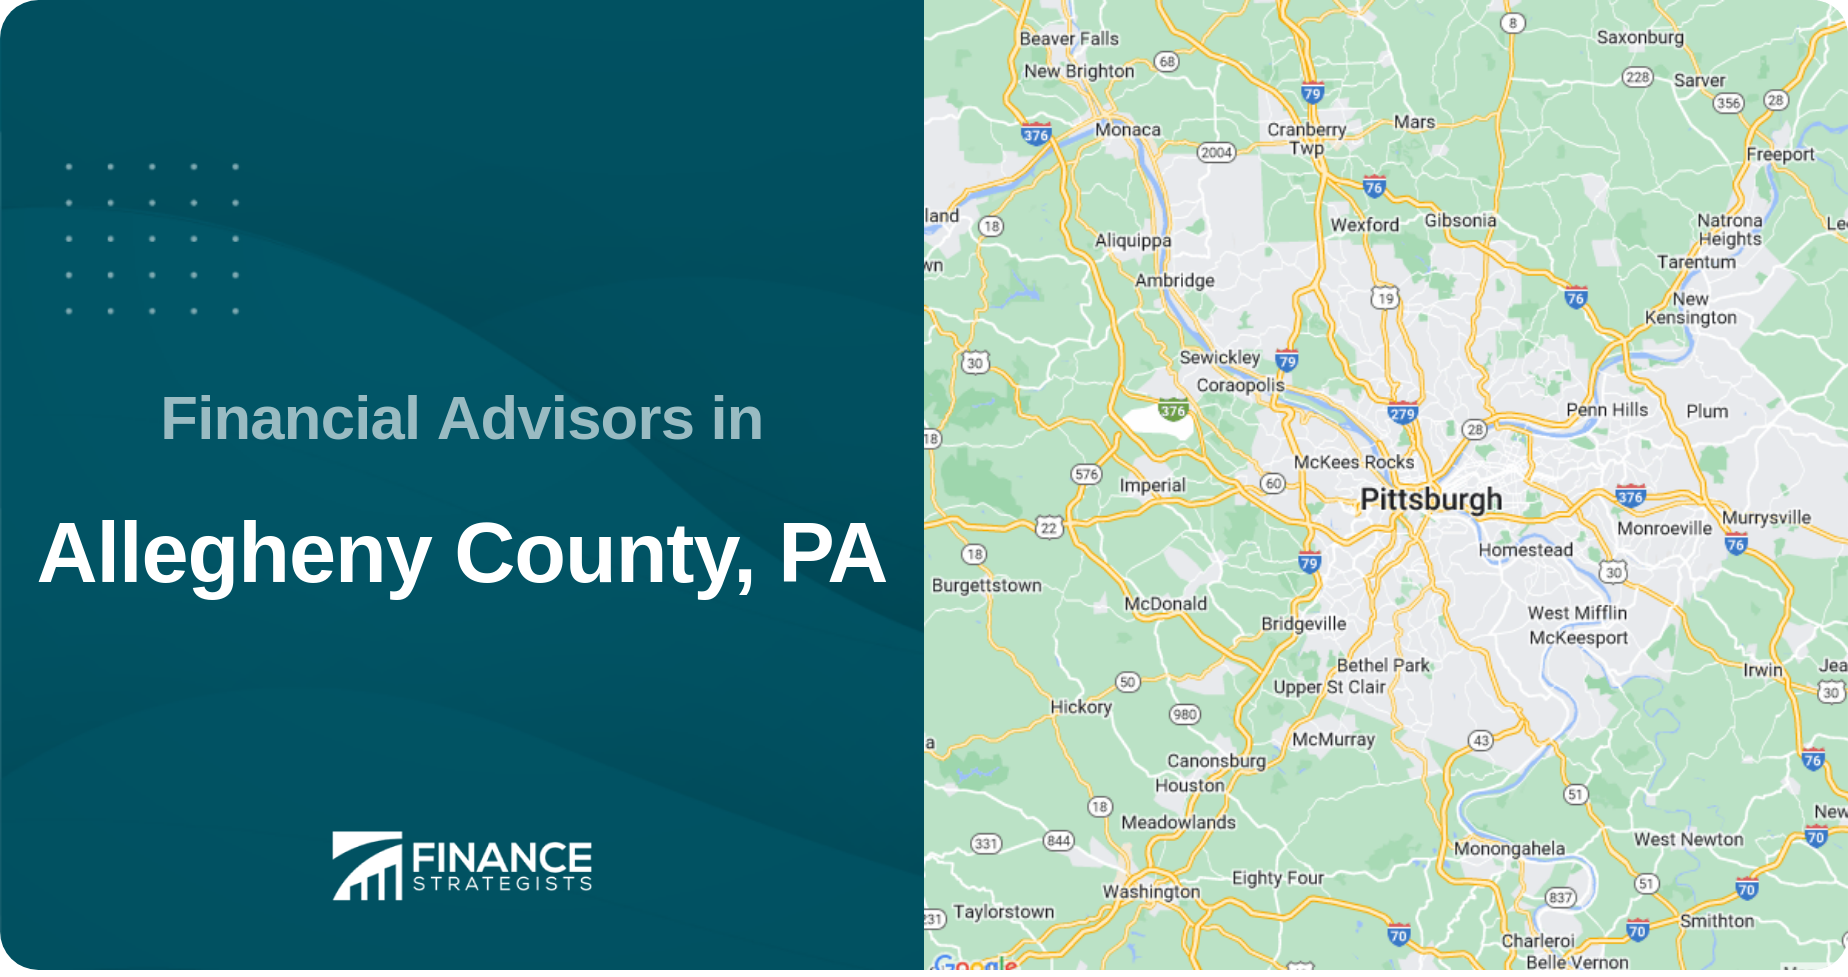 Financial Advisors in Allegheny County, PA